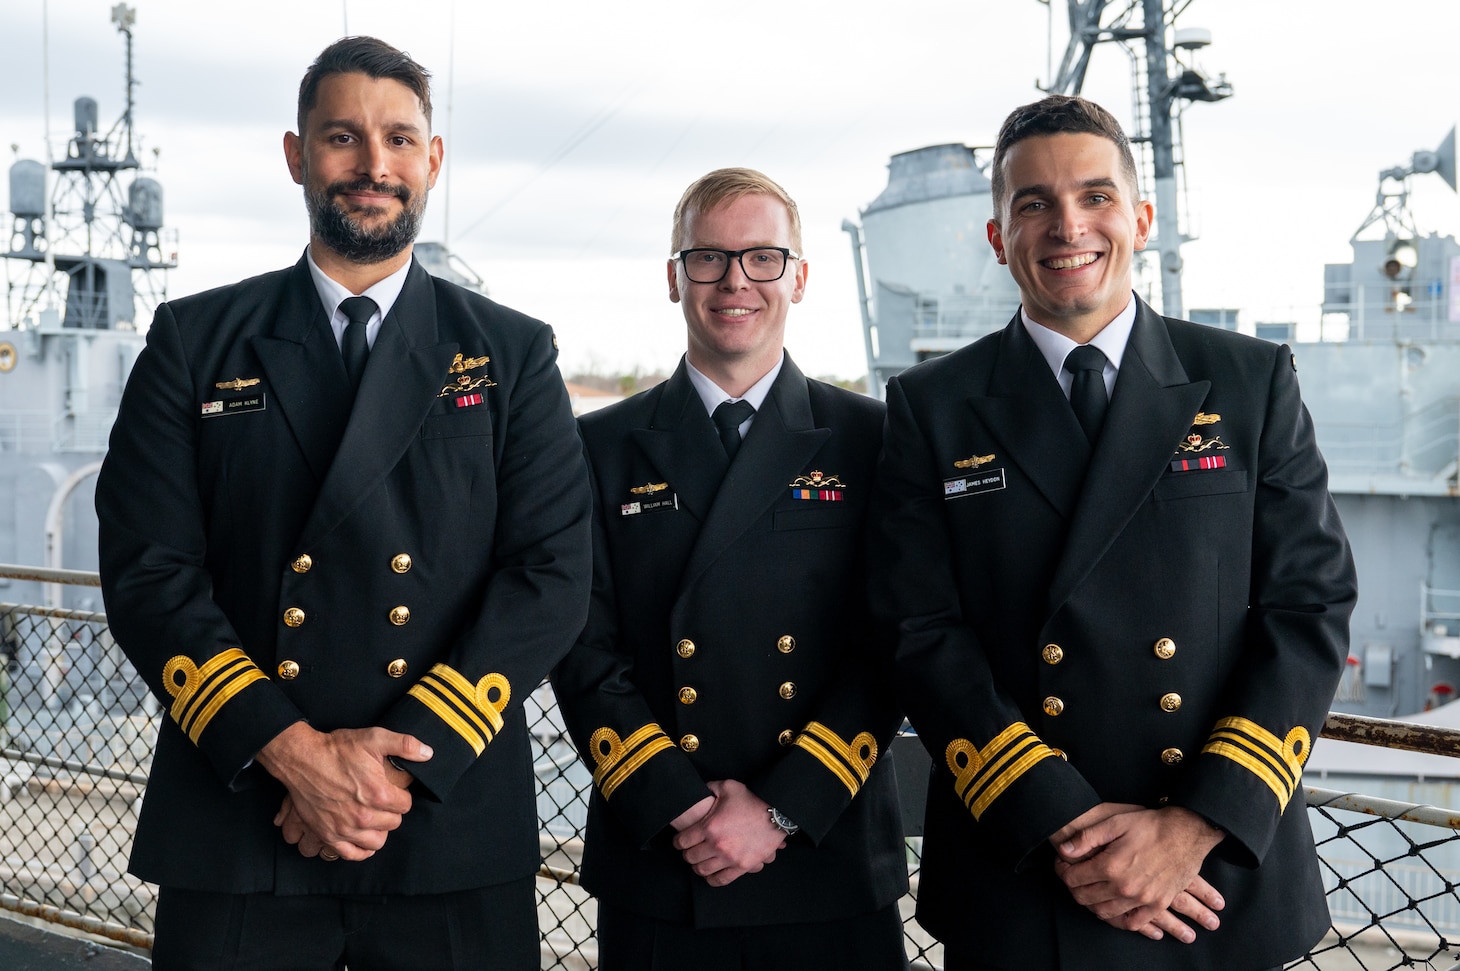 Royal Australian Navy Lt. Cmdr. Adam Klyne (left), Lt. William Hall (middle), and Lt. Cmdr. James Heydon (right), U.S. Navy’s Nuclear Power Training Unit - Charleston graduates, pose for a photo aboard USS Yorktown (CV 10) at the Patriots Point Naval and Maritime Museum in Mt. Pleasant, South Carolina, Jan. 12, 2024.